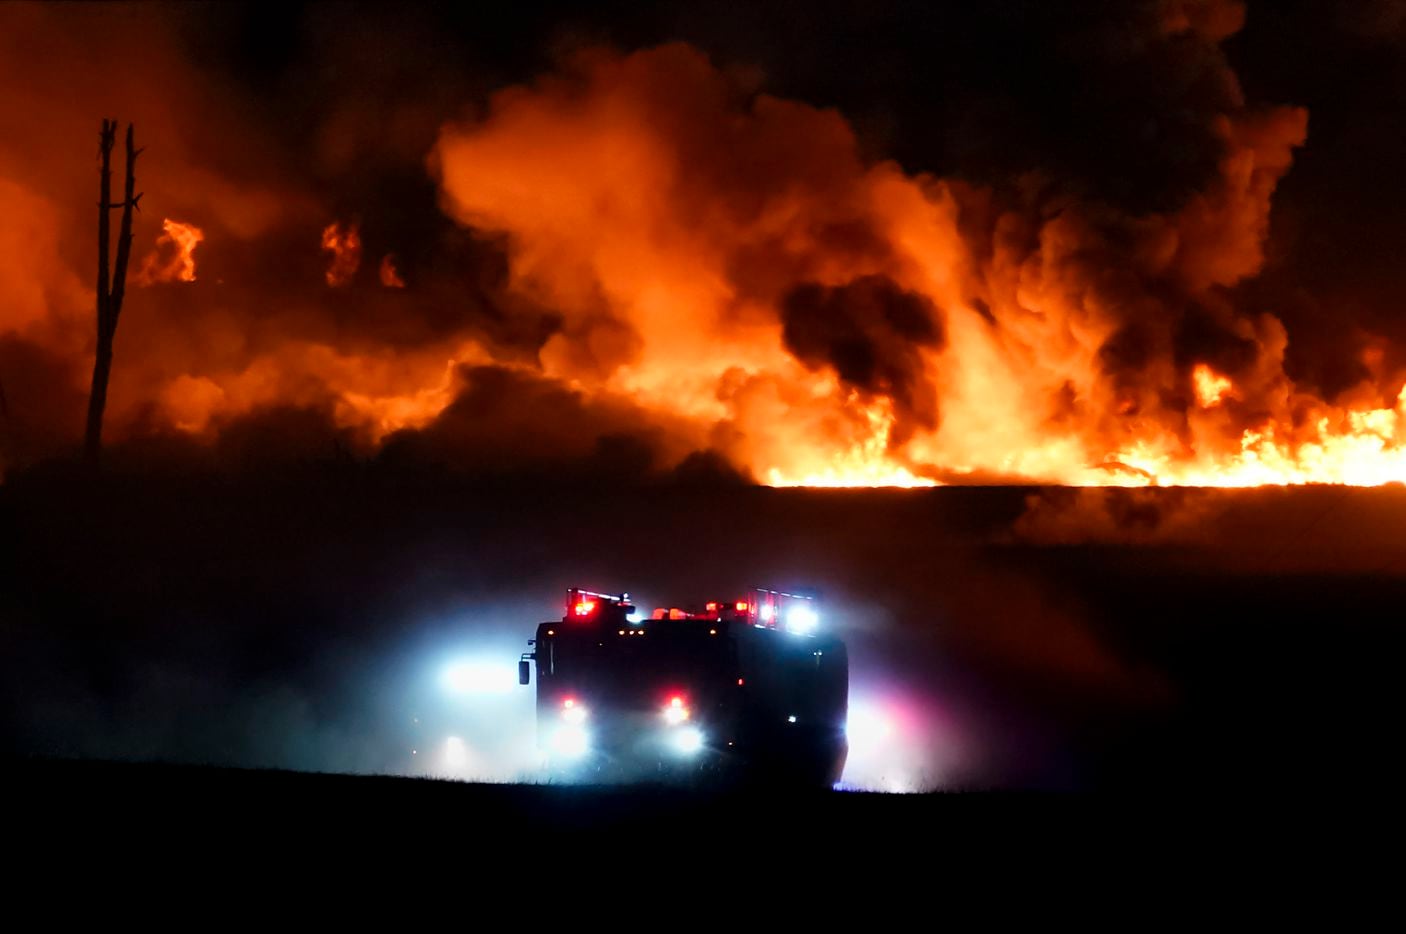 Fire crews battle a massive blaze in an industrial area of Grand Prairie, Texas, in the early morning hours of Wednesday, Aug. 19, 2020. The fire is in the 2000 block of West Marshall Drive, near the Bush Turnpike. Among the businesses in the area is Poly-America, a company that produces trash bags and other plastic products. (Smiley N. Pool/The Dallas Morning News)